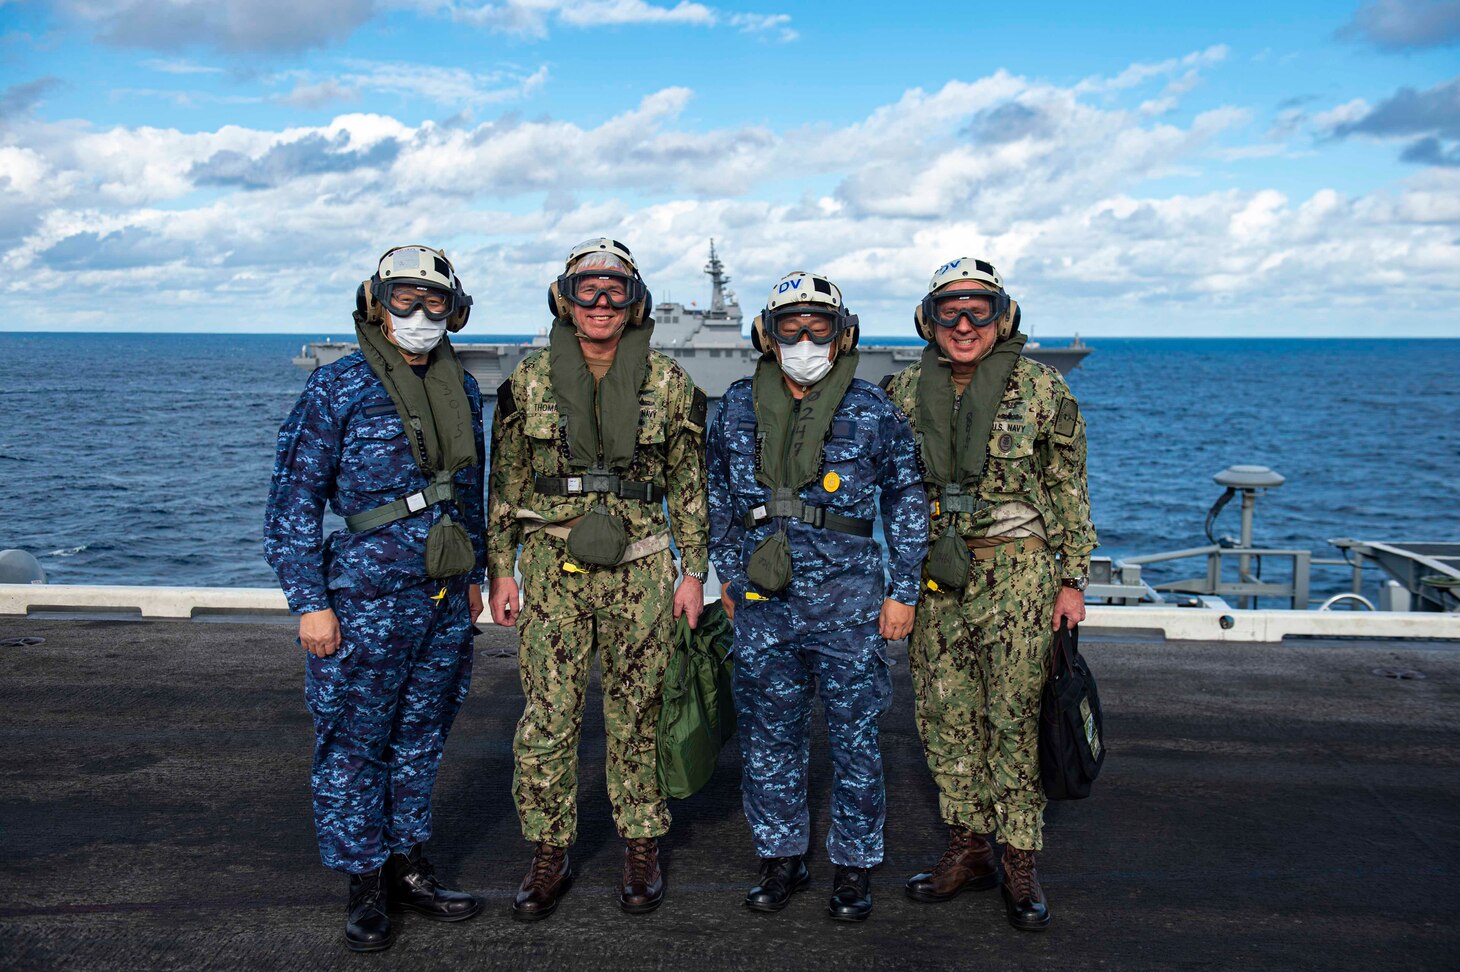 211130-N-IW069-1231 PHILIPPINE SEA (Nov. 30, 2021) From left to right Vice Adm. Hideki Yuasa, commander, Japan Maritime Self-Defense Force (JMSDF), Vice Adm. Karl Thomas, commander, U.S. 7th Fleet, Japan Maritime Self Defense Force Fleet Master Chief Yoshihiro Aoyama, Self Defense Force, U.S. 7th Fleet Command Master Chief Jason Haka, pose for a photo on the flight deck of Nimitz-class aircraft carrier USS Carl Vinson (CVN 70), during Annual Exercise (ANNUALEX) 2021, Nov. 30, 2021. ANNUALEX 2021 is a multilateral exercise conducted by naval elements of the Royal Australian, Royal Canadian, German, JMSDF and U.S. navies to demonstrate naval interoperability and a joint commitment to a free, open and inclusive Indo-Pacific. (U.S. Navy photo by Mass Communication Specialist 3rd Class Isaiah M. Williams) (This photo has been altered for security purposes by blurring out name tapes.)